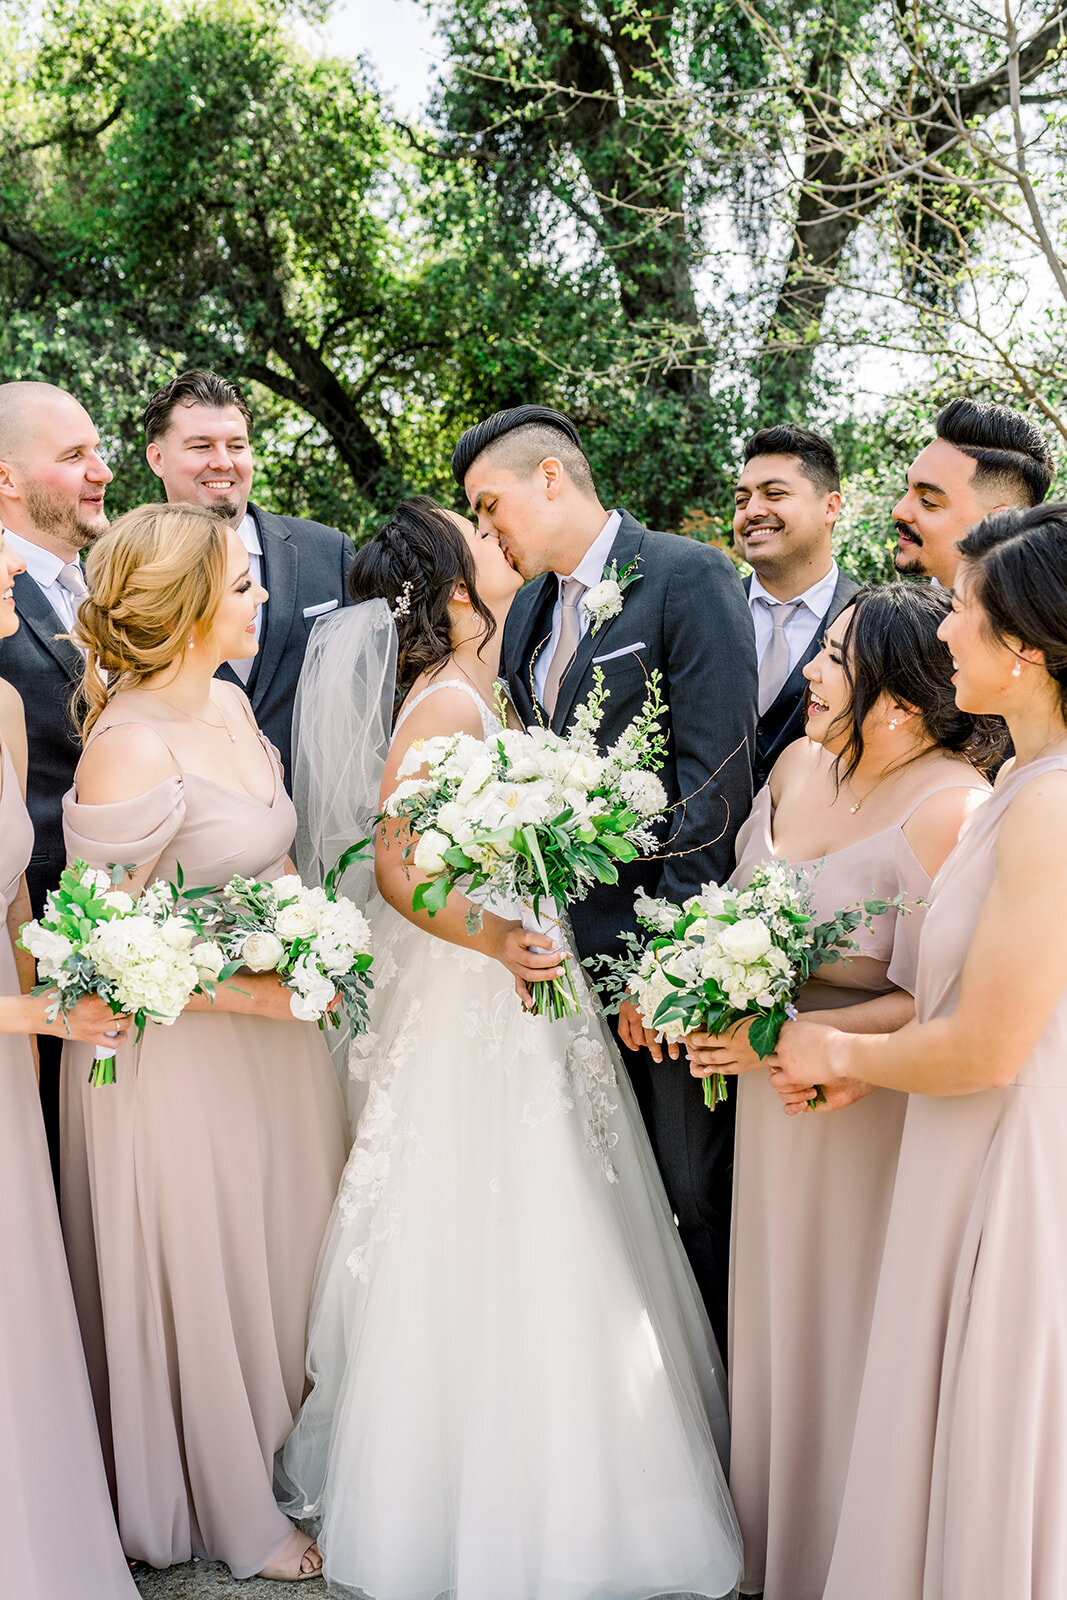 Wedding party at Union hill inn in Sonora, CA